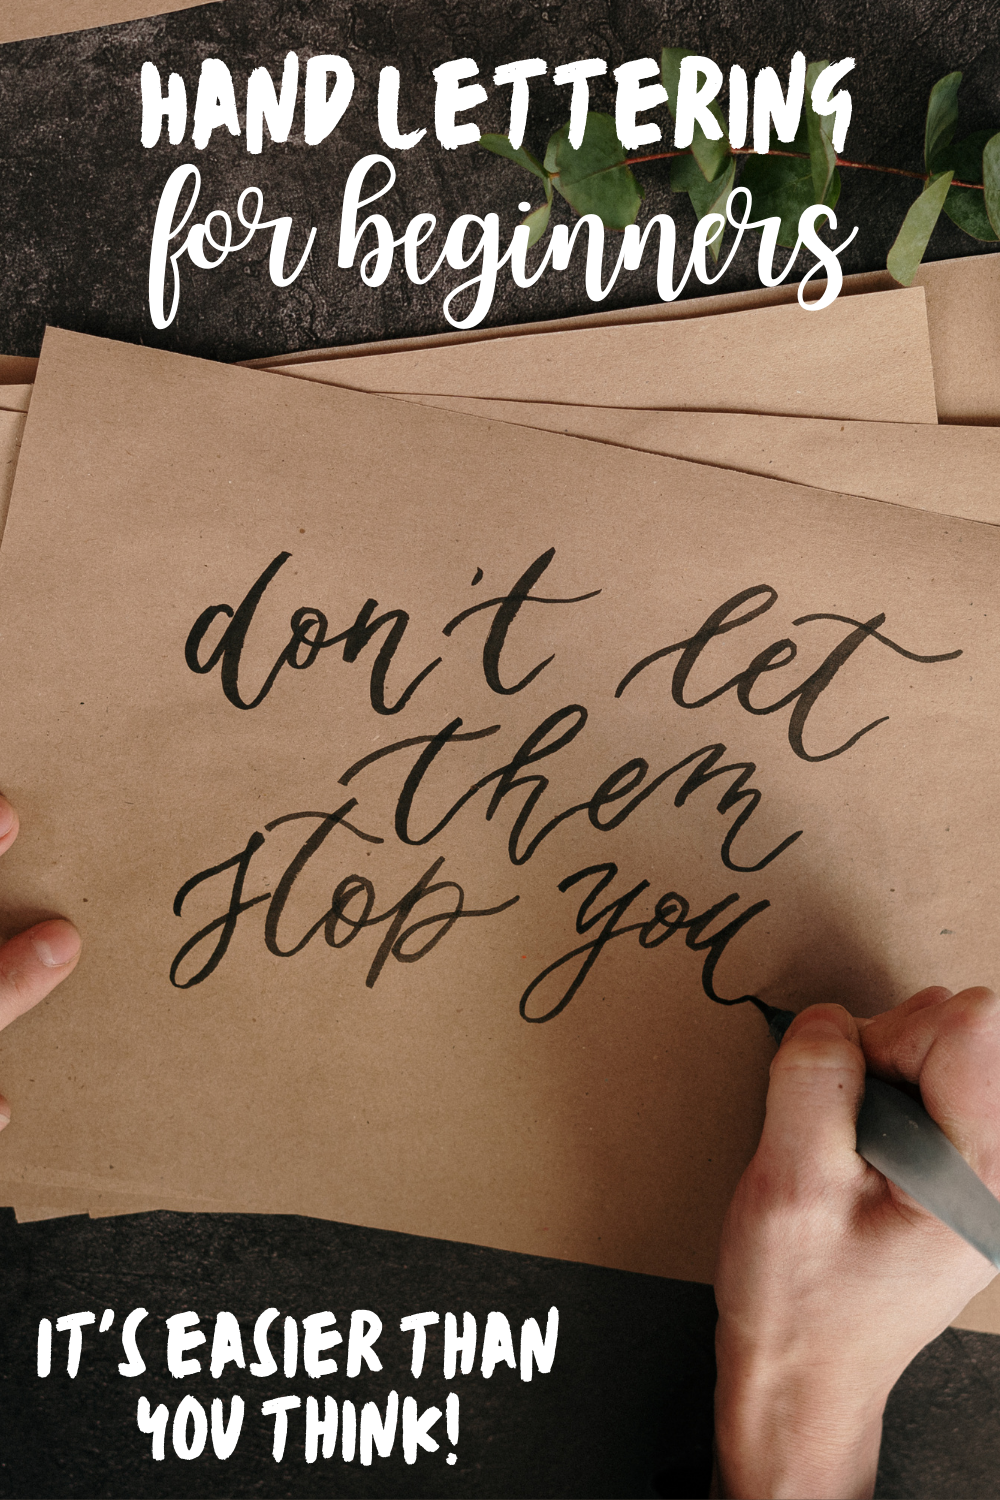 A photograph of hand-lettered text that reads Don't let them stop you. The text on the overlay reads: Hand lettering for beginners - it's easier than you think!